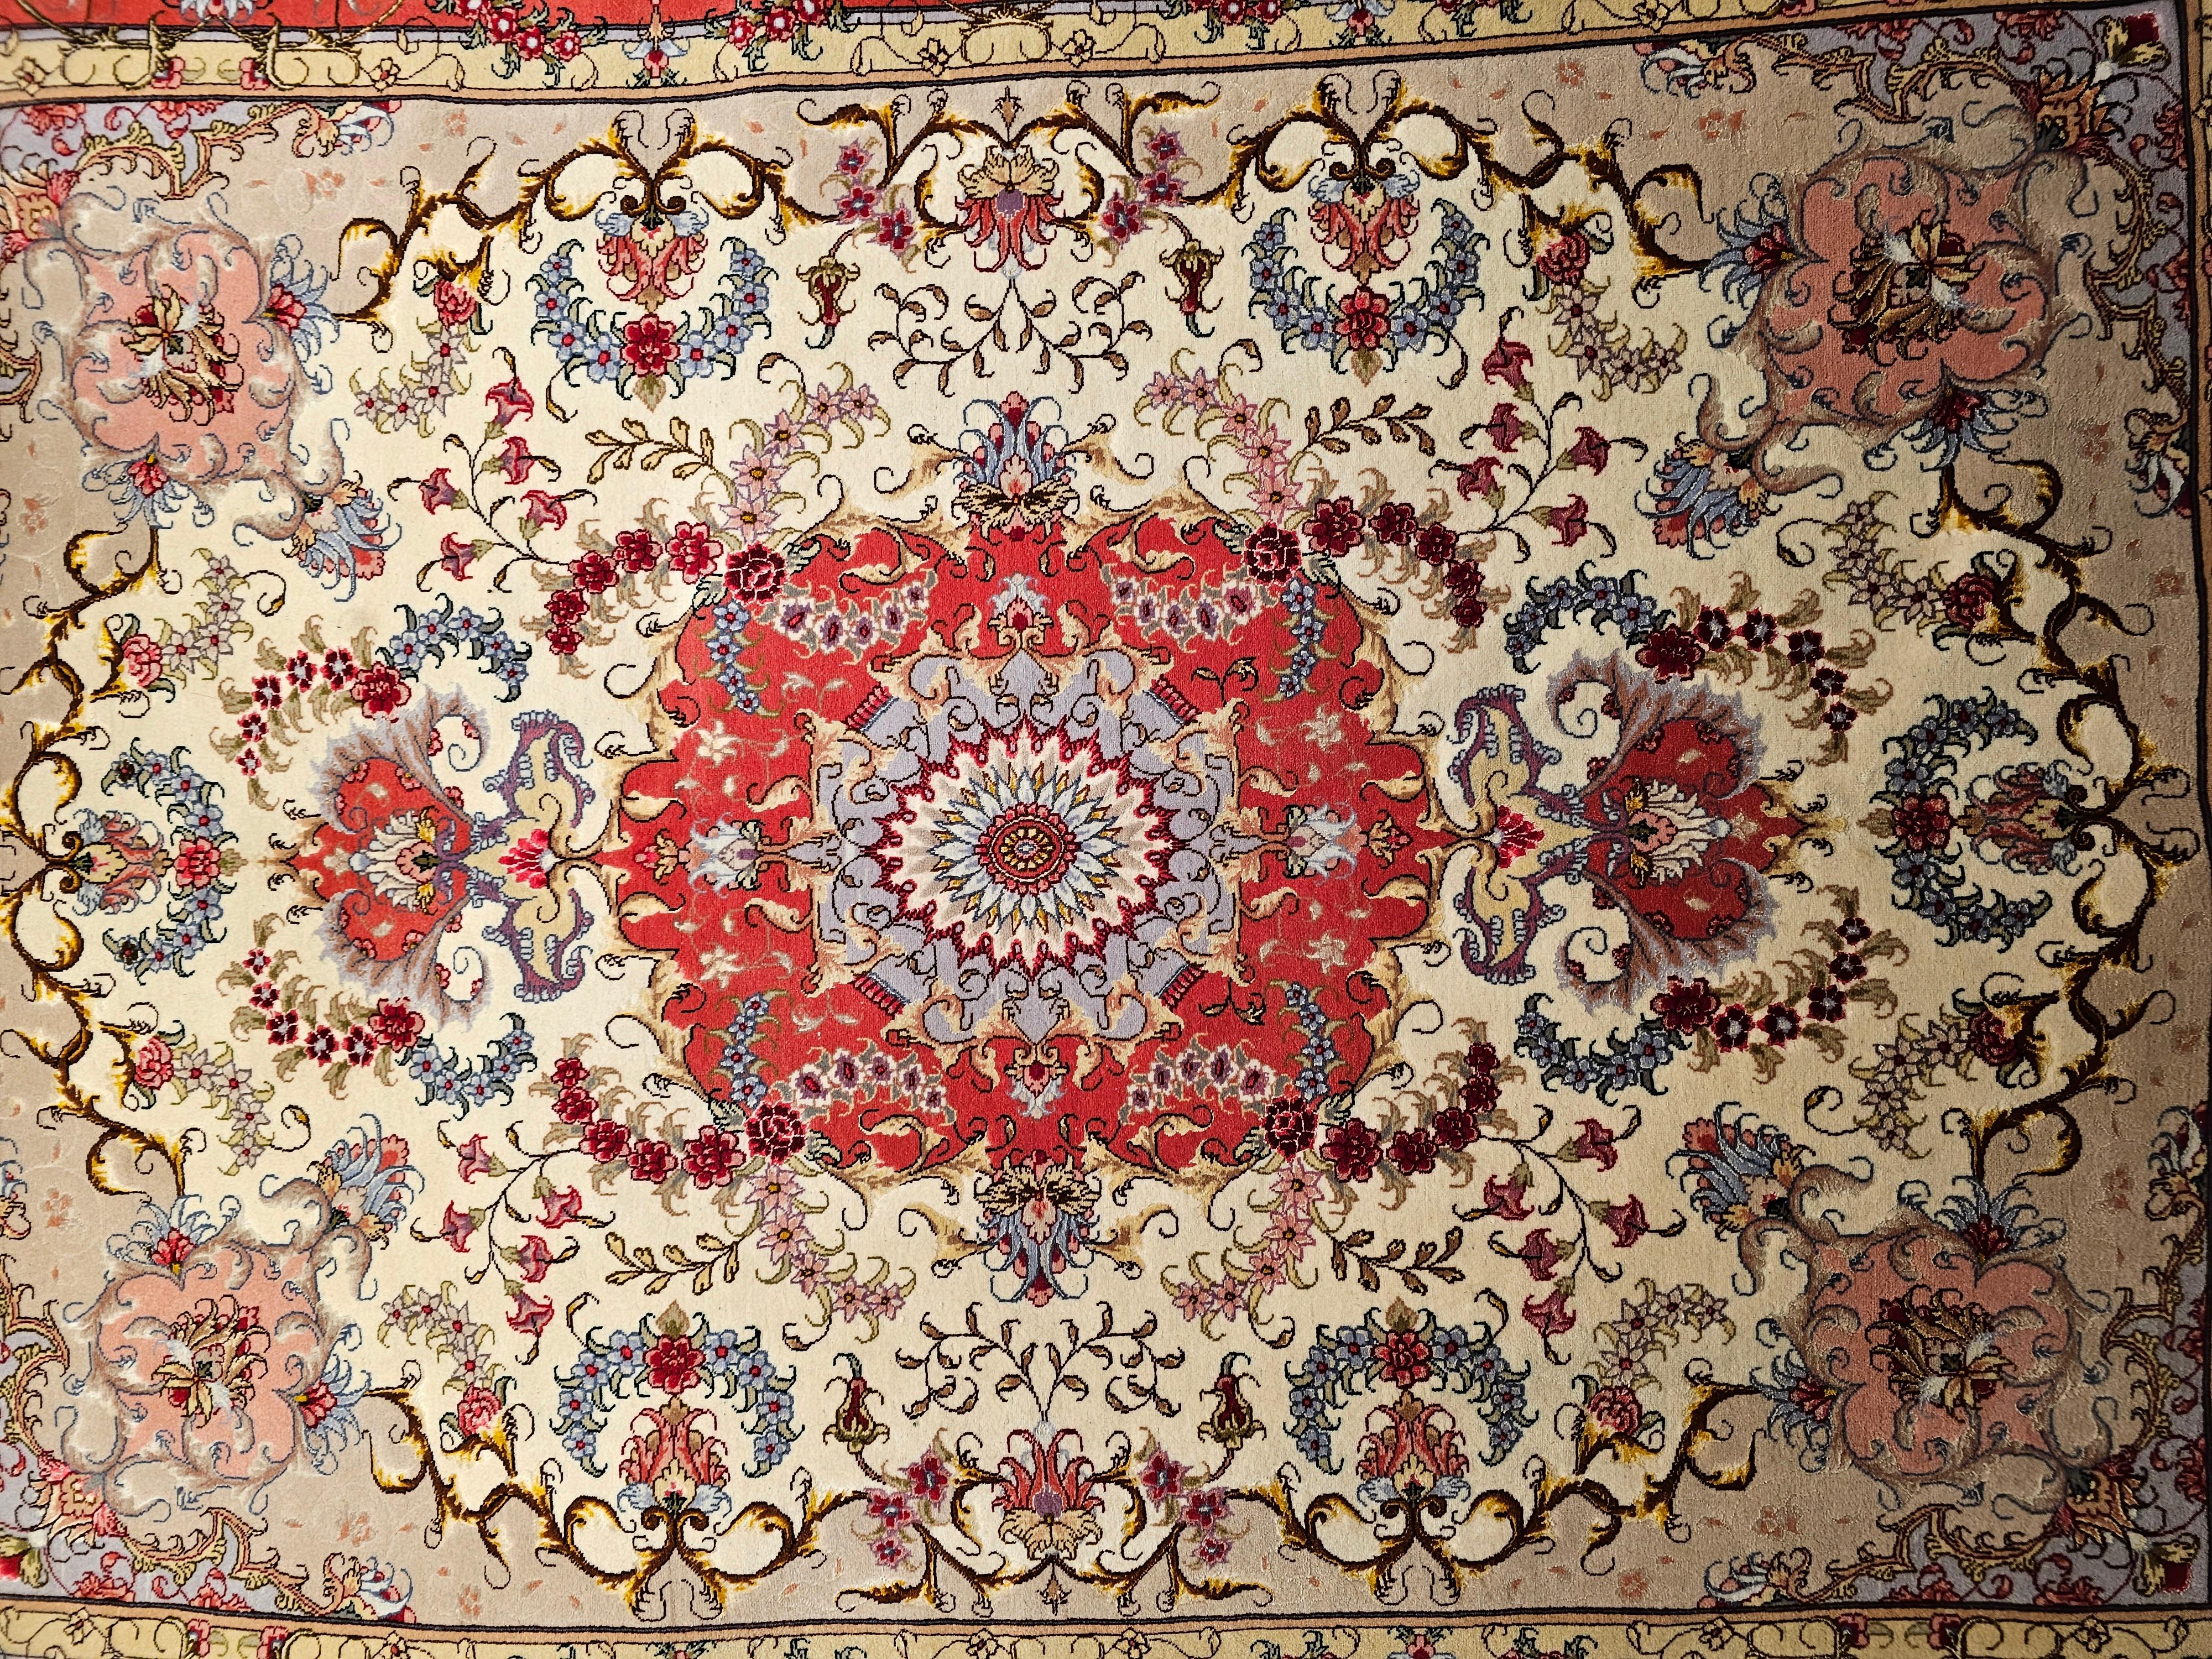 Finely-woven Persian Tabriz area rug in floral design with silk highlights from the late 1900s. The Tabriz rug has a floral “Garden Design” set in an ivory color field with a salmon color border with silk highlighting the designs. The corner